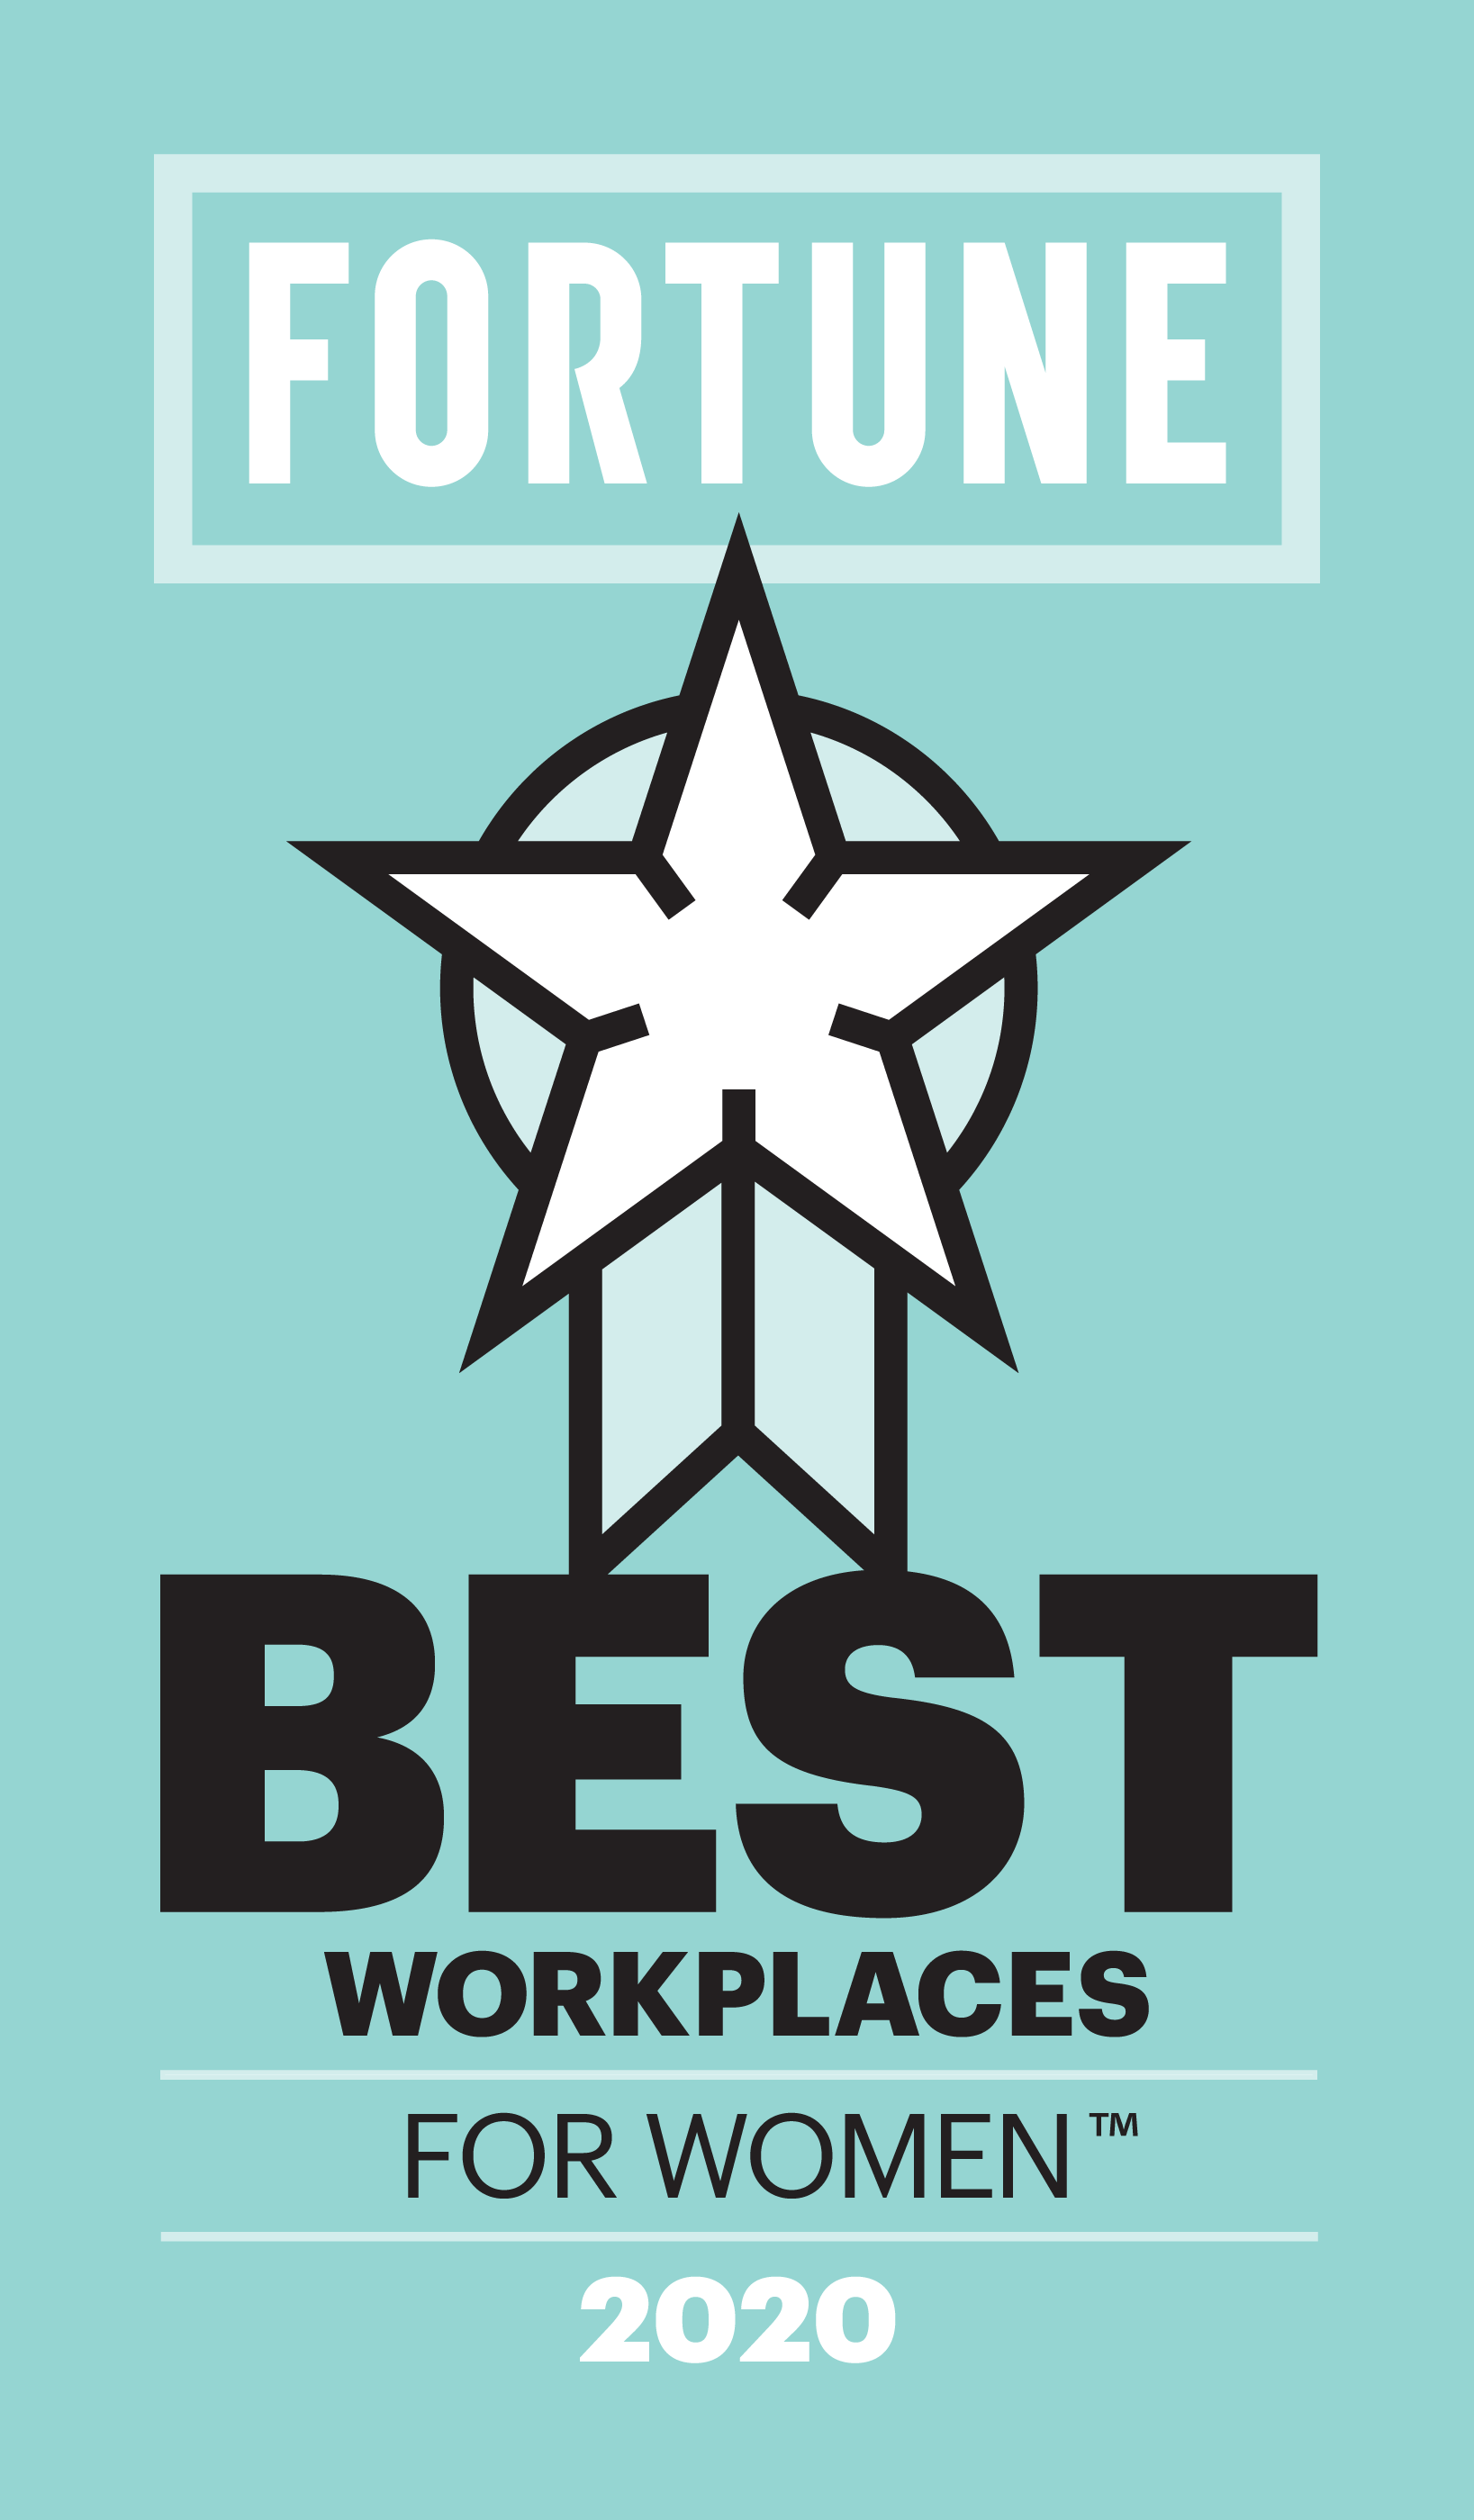 FORTUNE - Best Workplaces for Women 2020 Logo